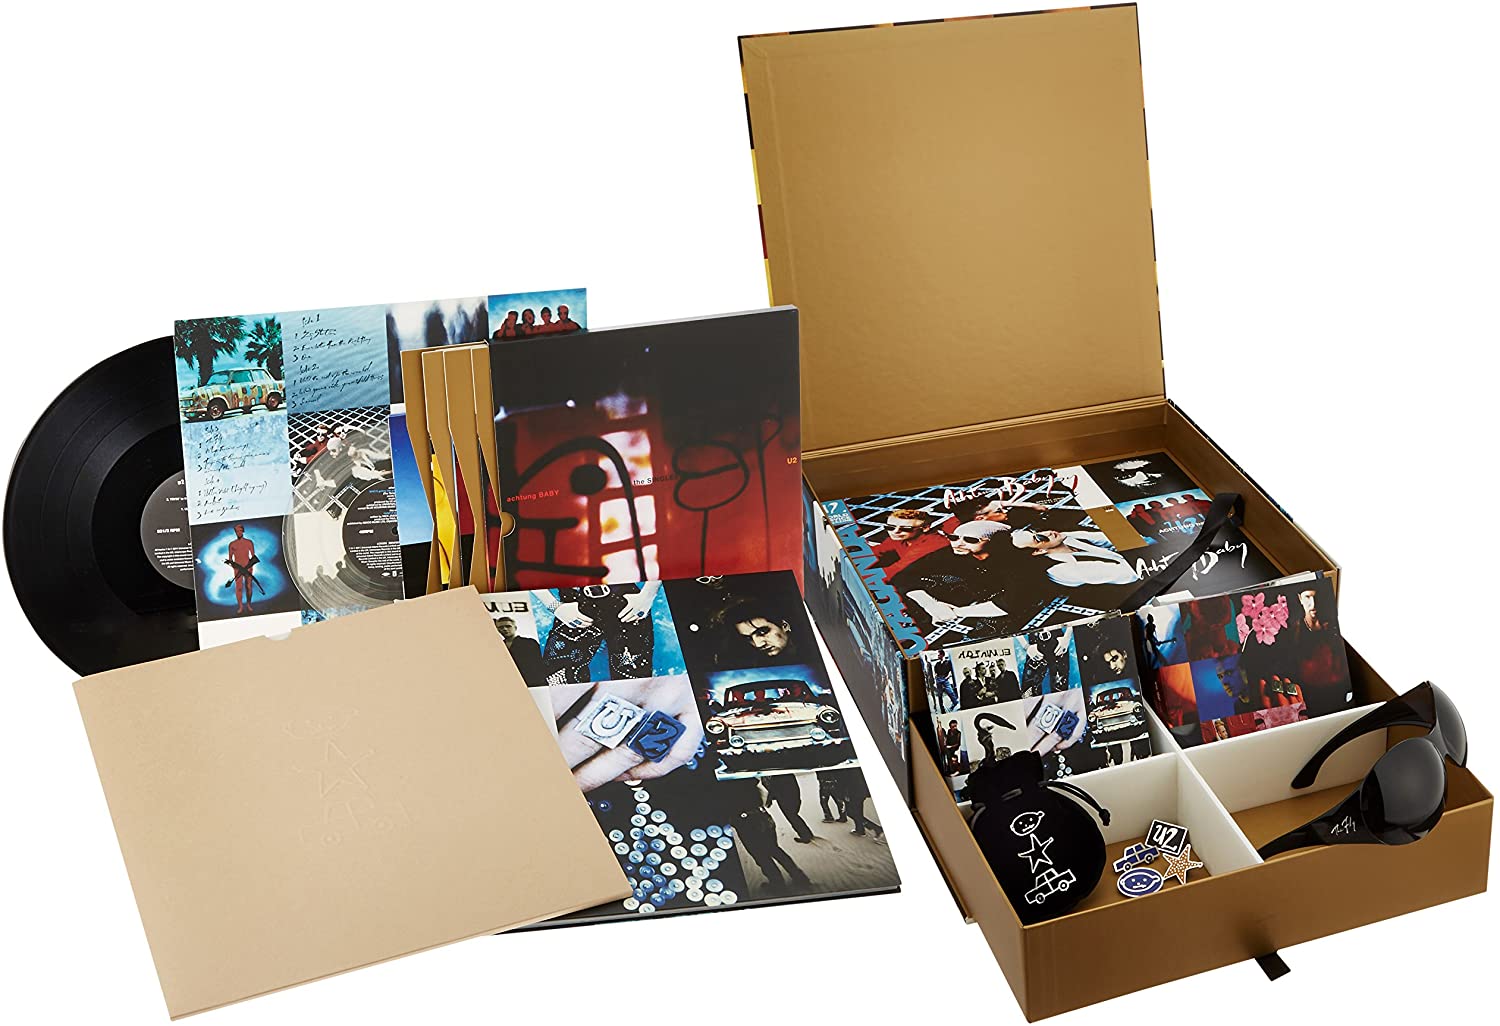 Vær sød at lade være En sætning verden What's the deal with this new U2 Achtung Baby reissue? – SuperDeluxeEdition